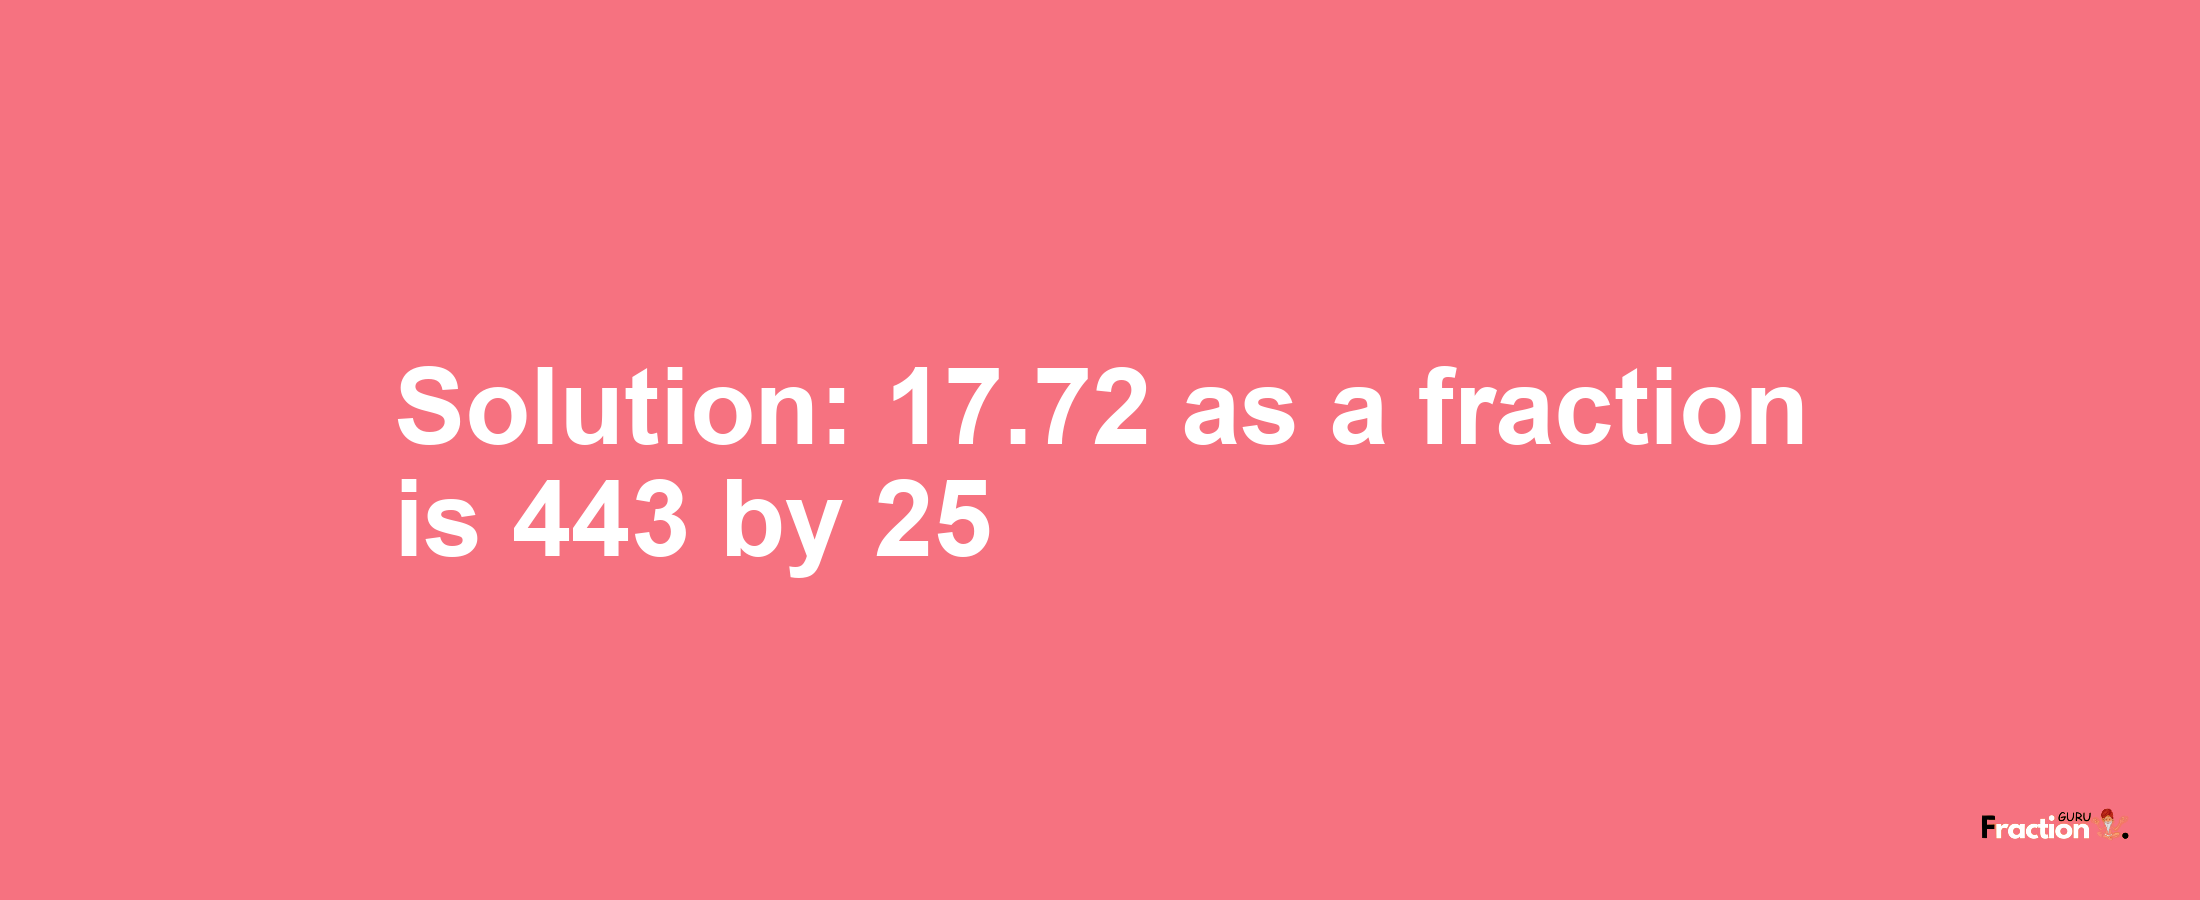 Solution:17.72 as a fraction is 443/25